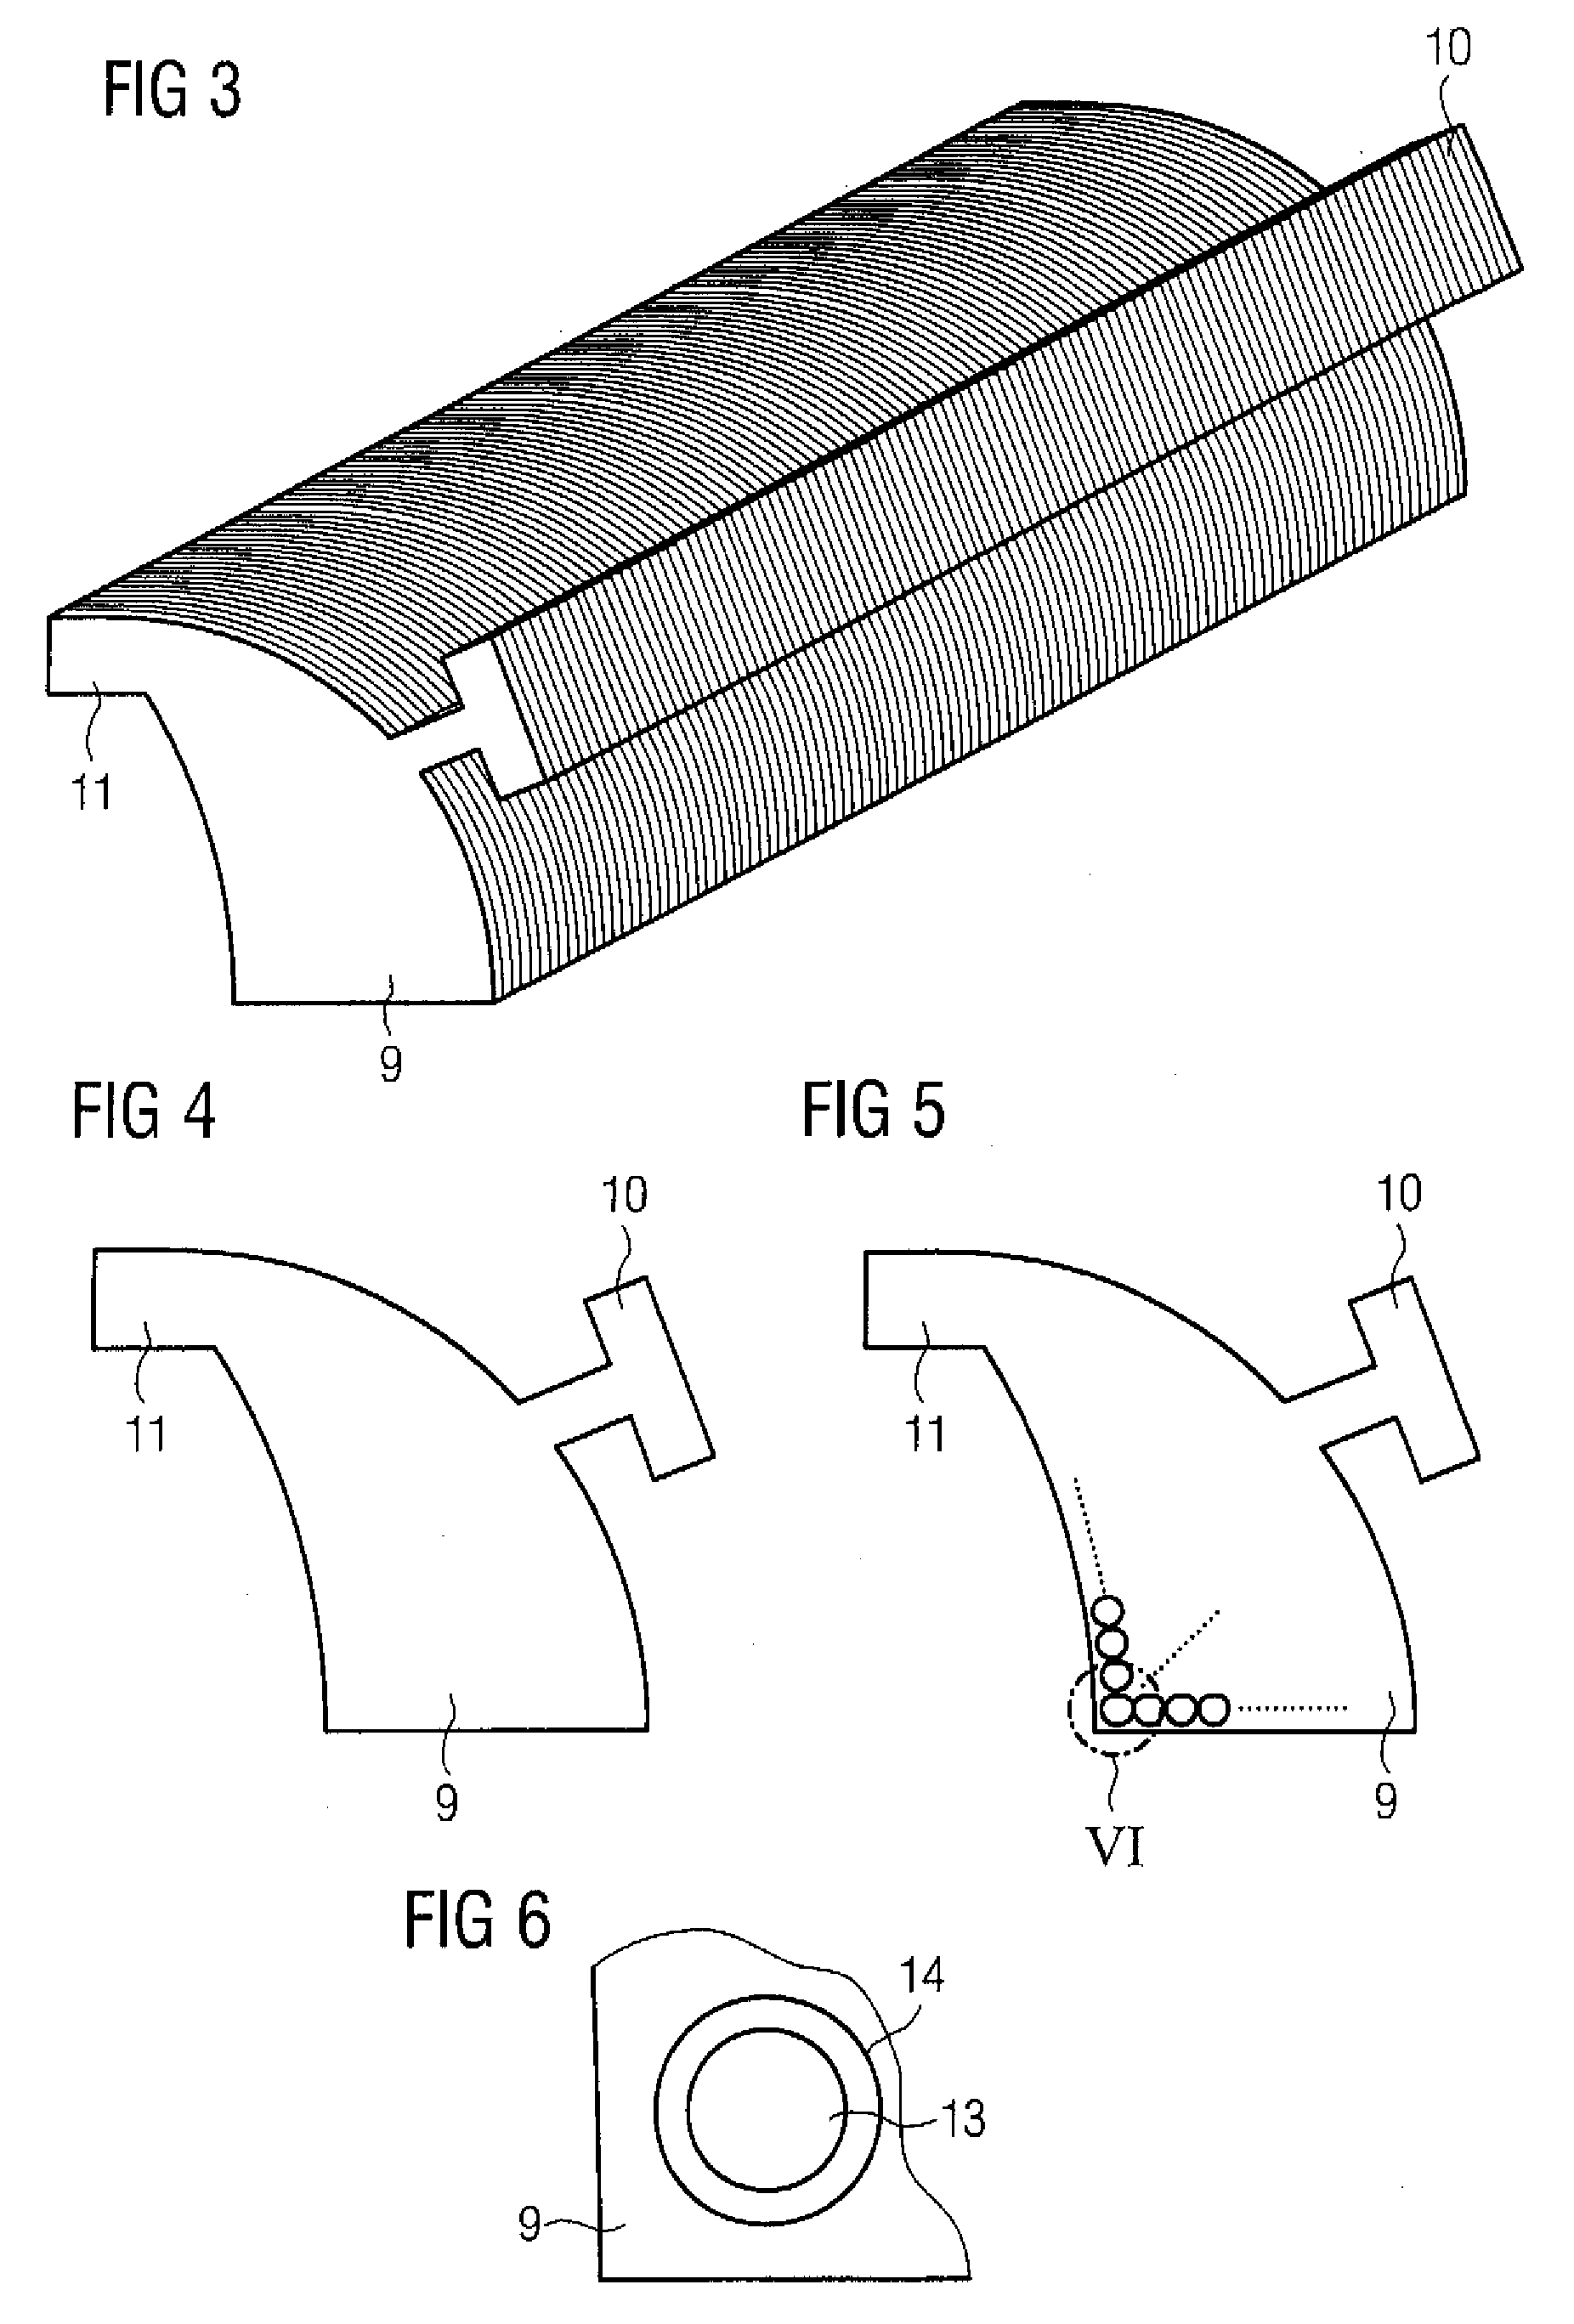 Dynamo-electrical machine with tooth-wound coils